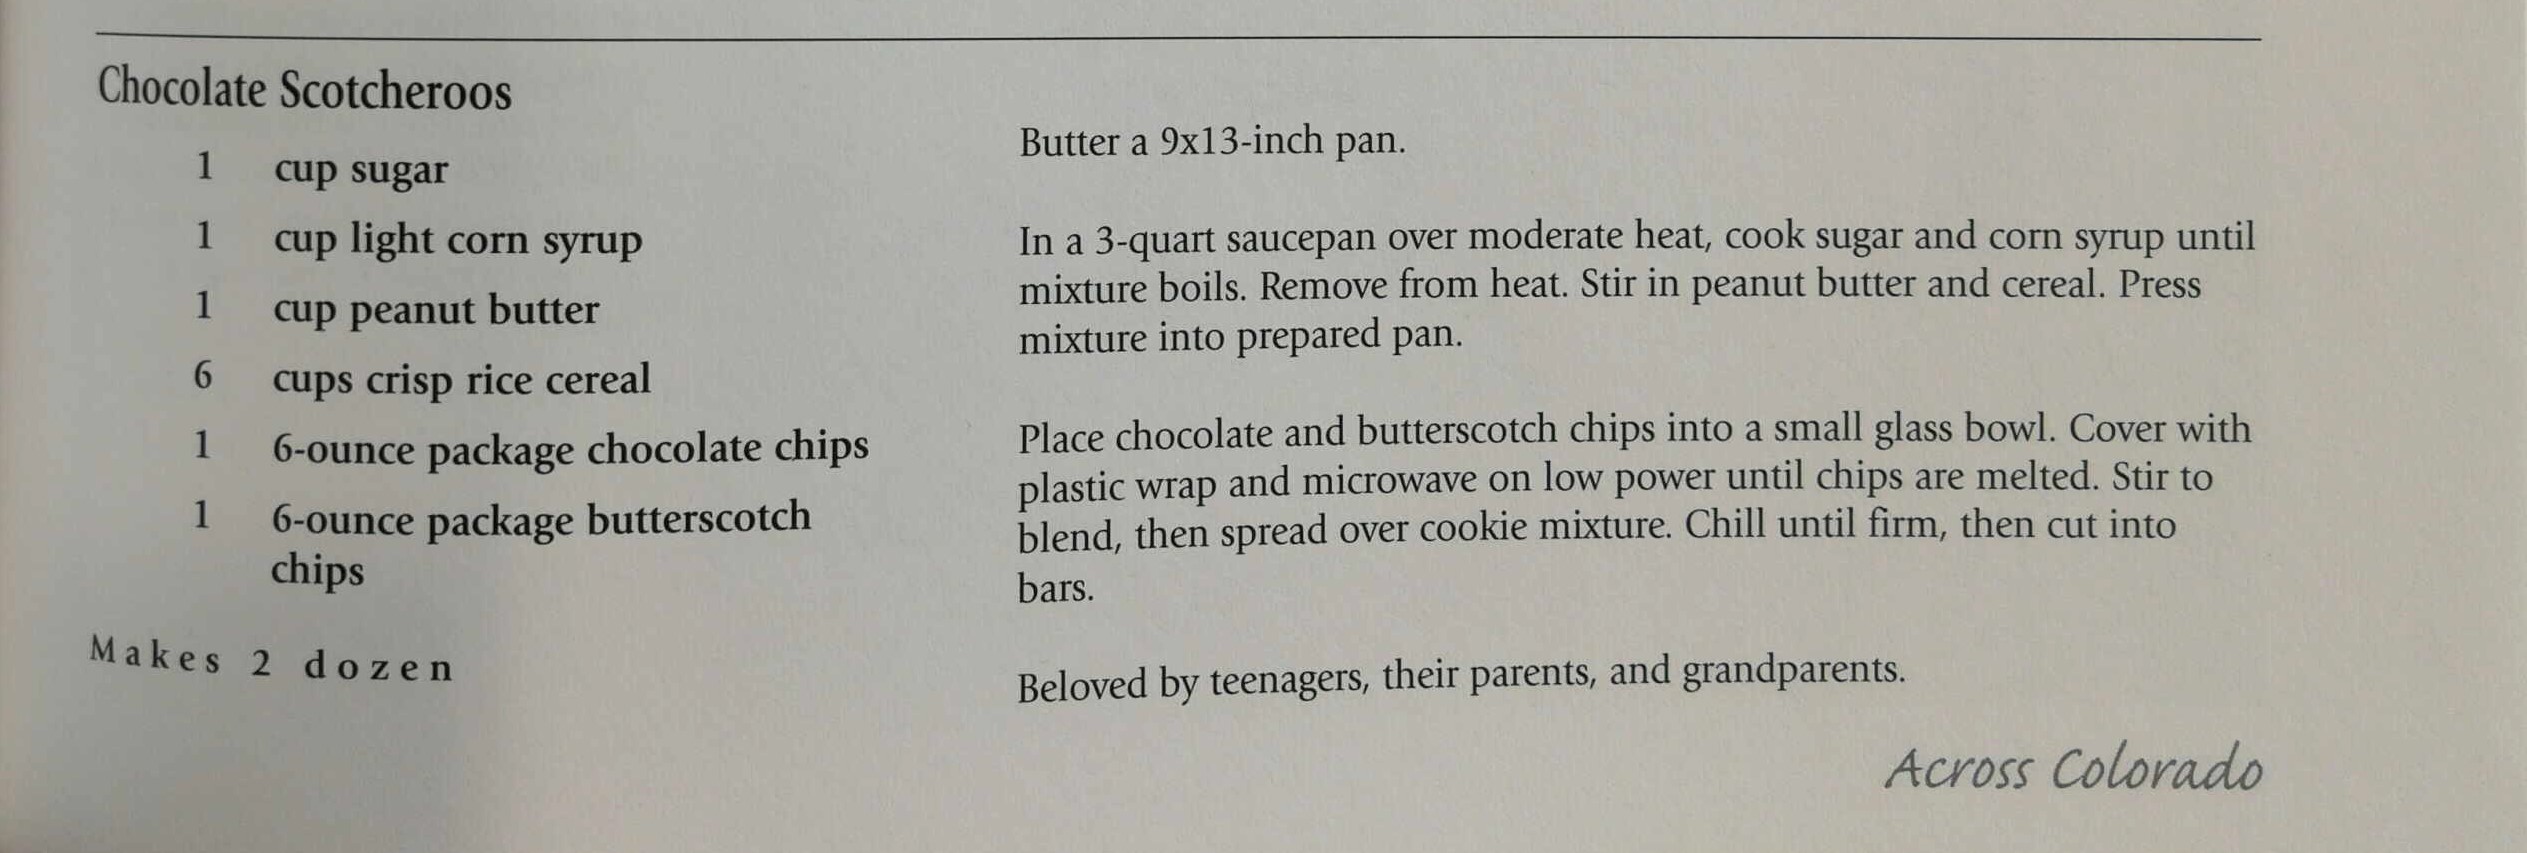 Image of a recipe scanned from a cookbook in the History Colorado collection.